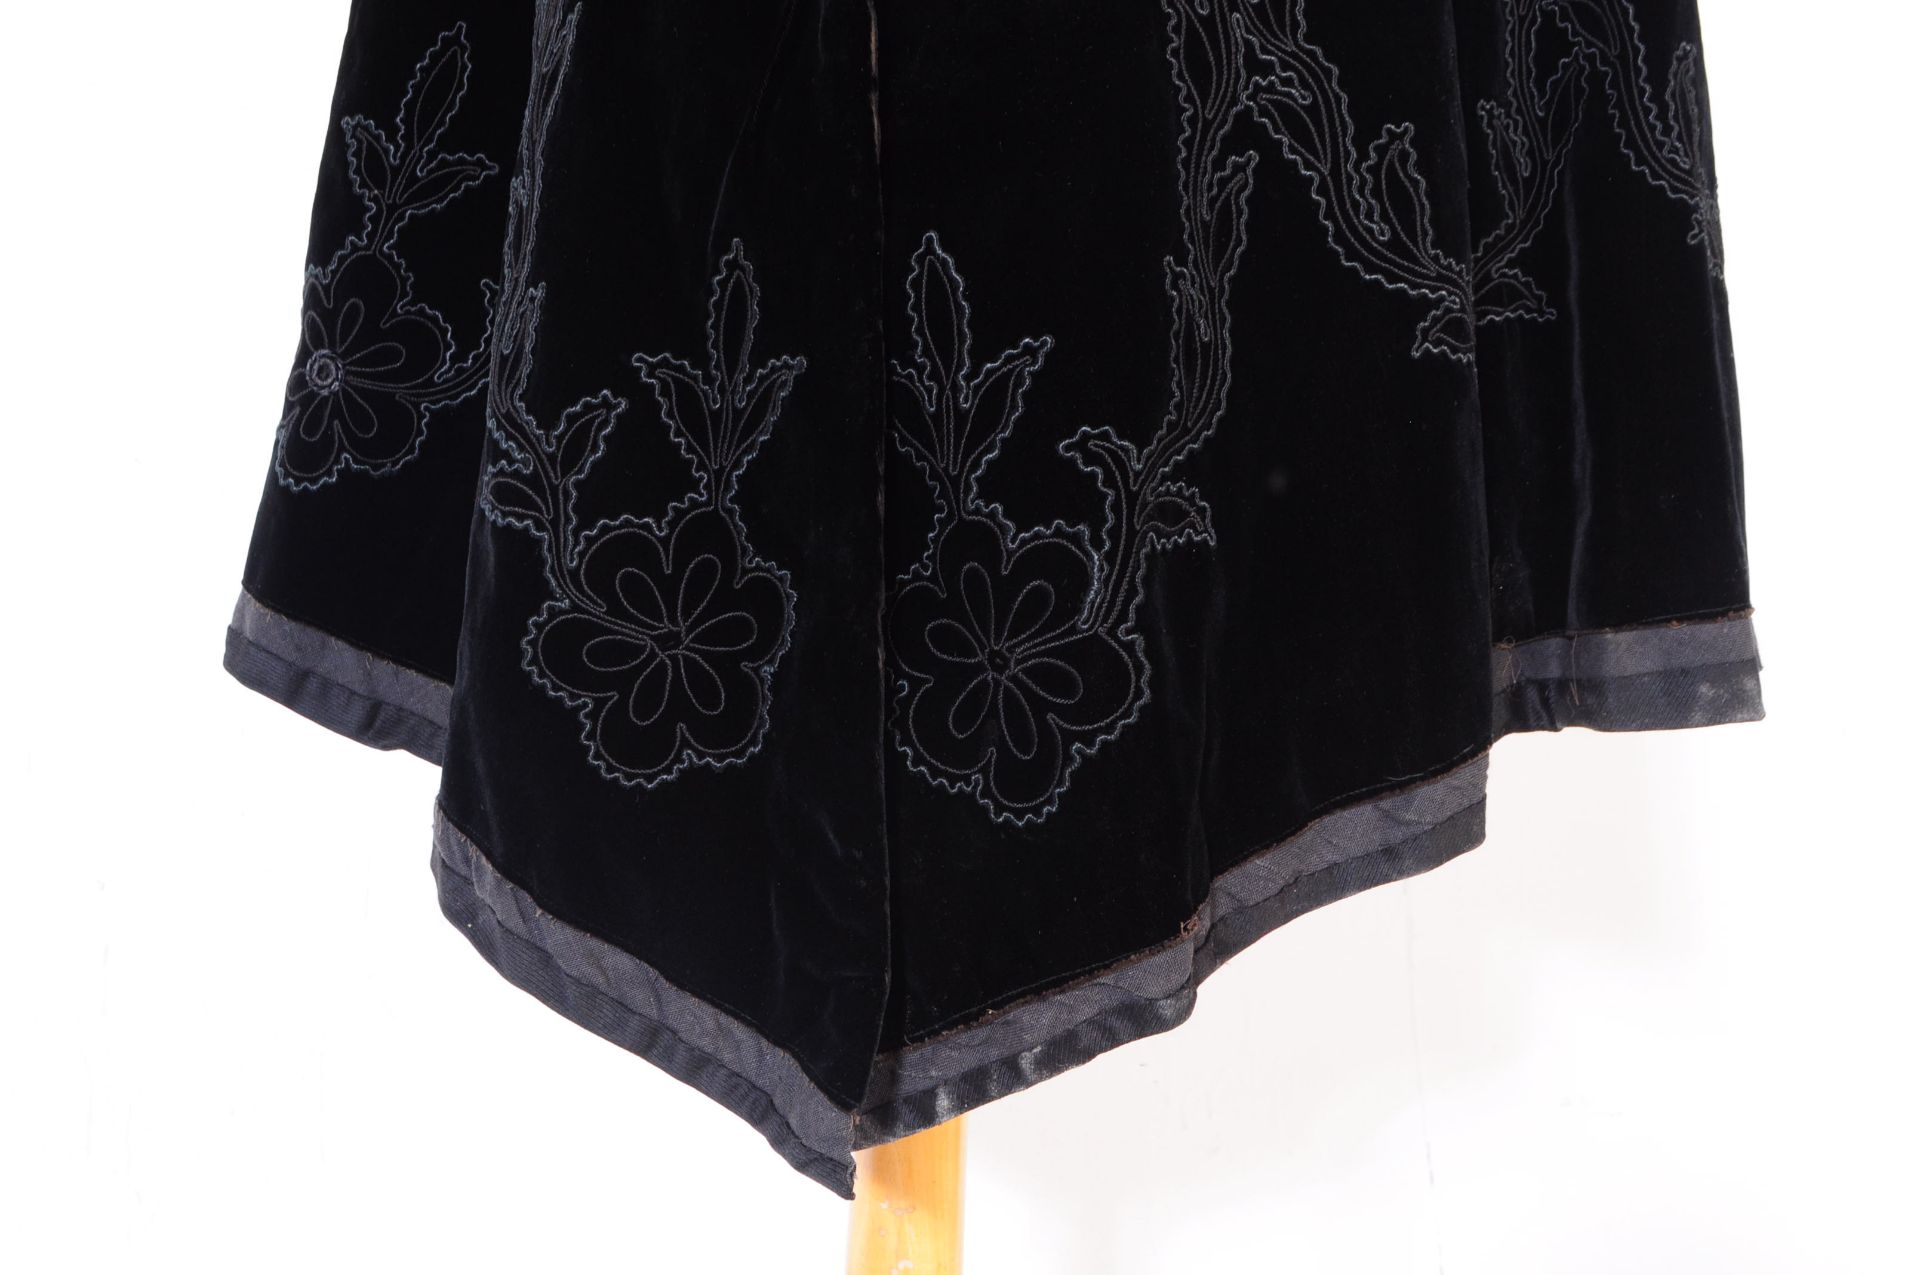 TWO VICTORIAN CLOTHING ITEMS - VELVET CAPE & SHIRT - Image 12 of 12